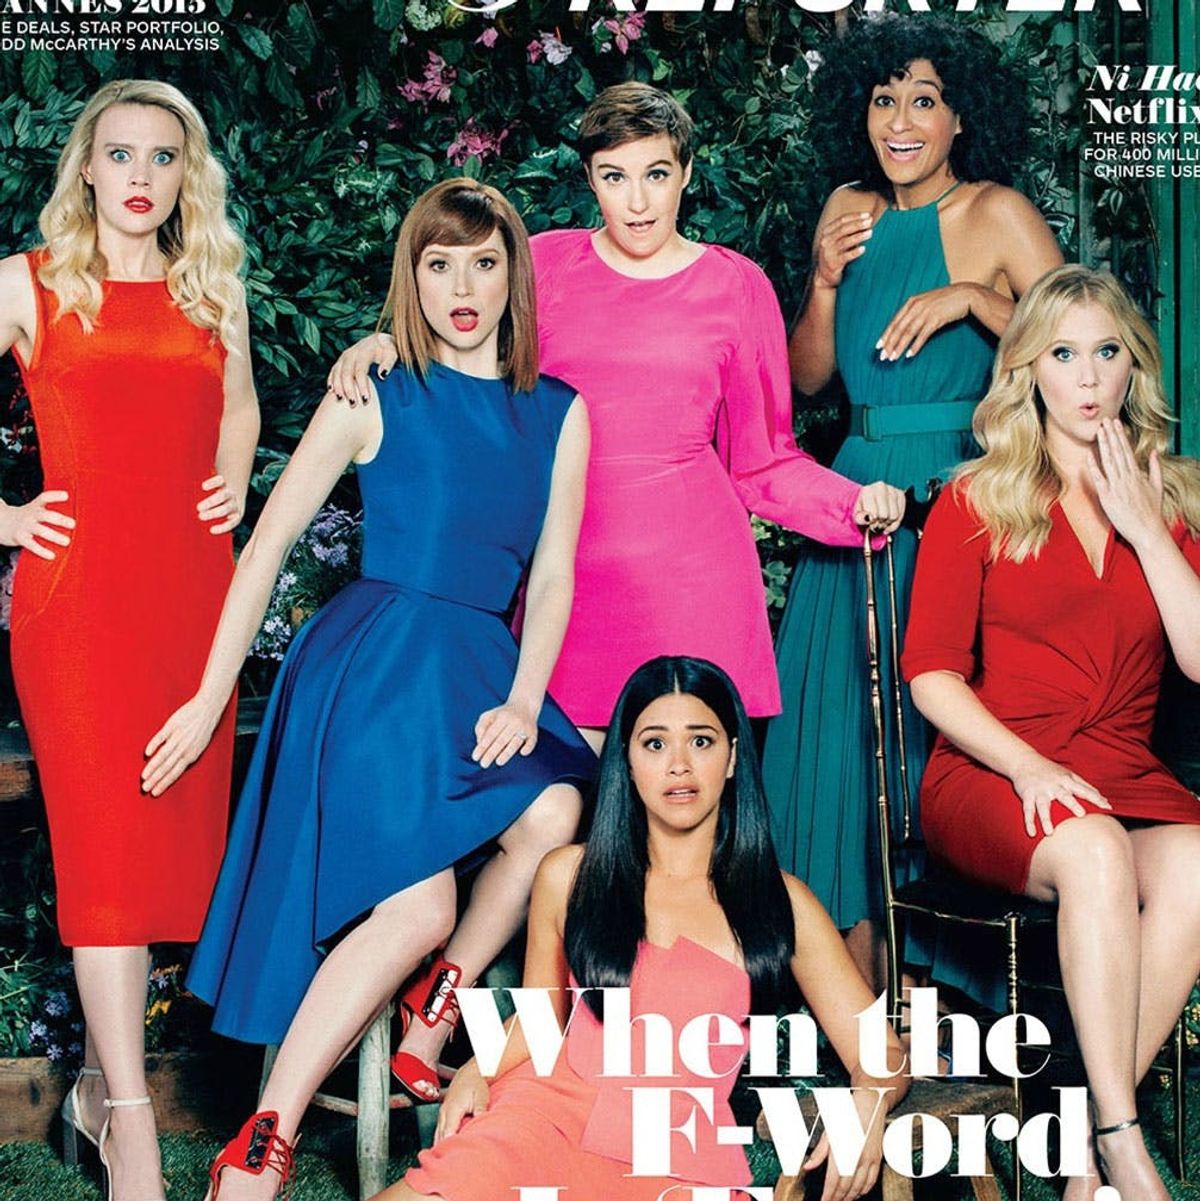 This Is the Best Girl Power Magazine Cover of the Year